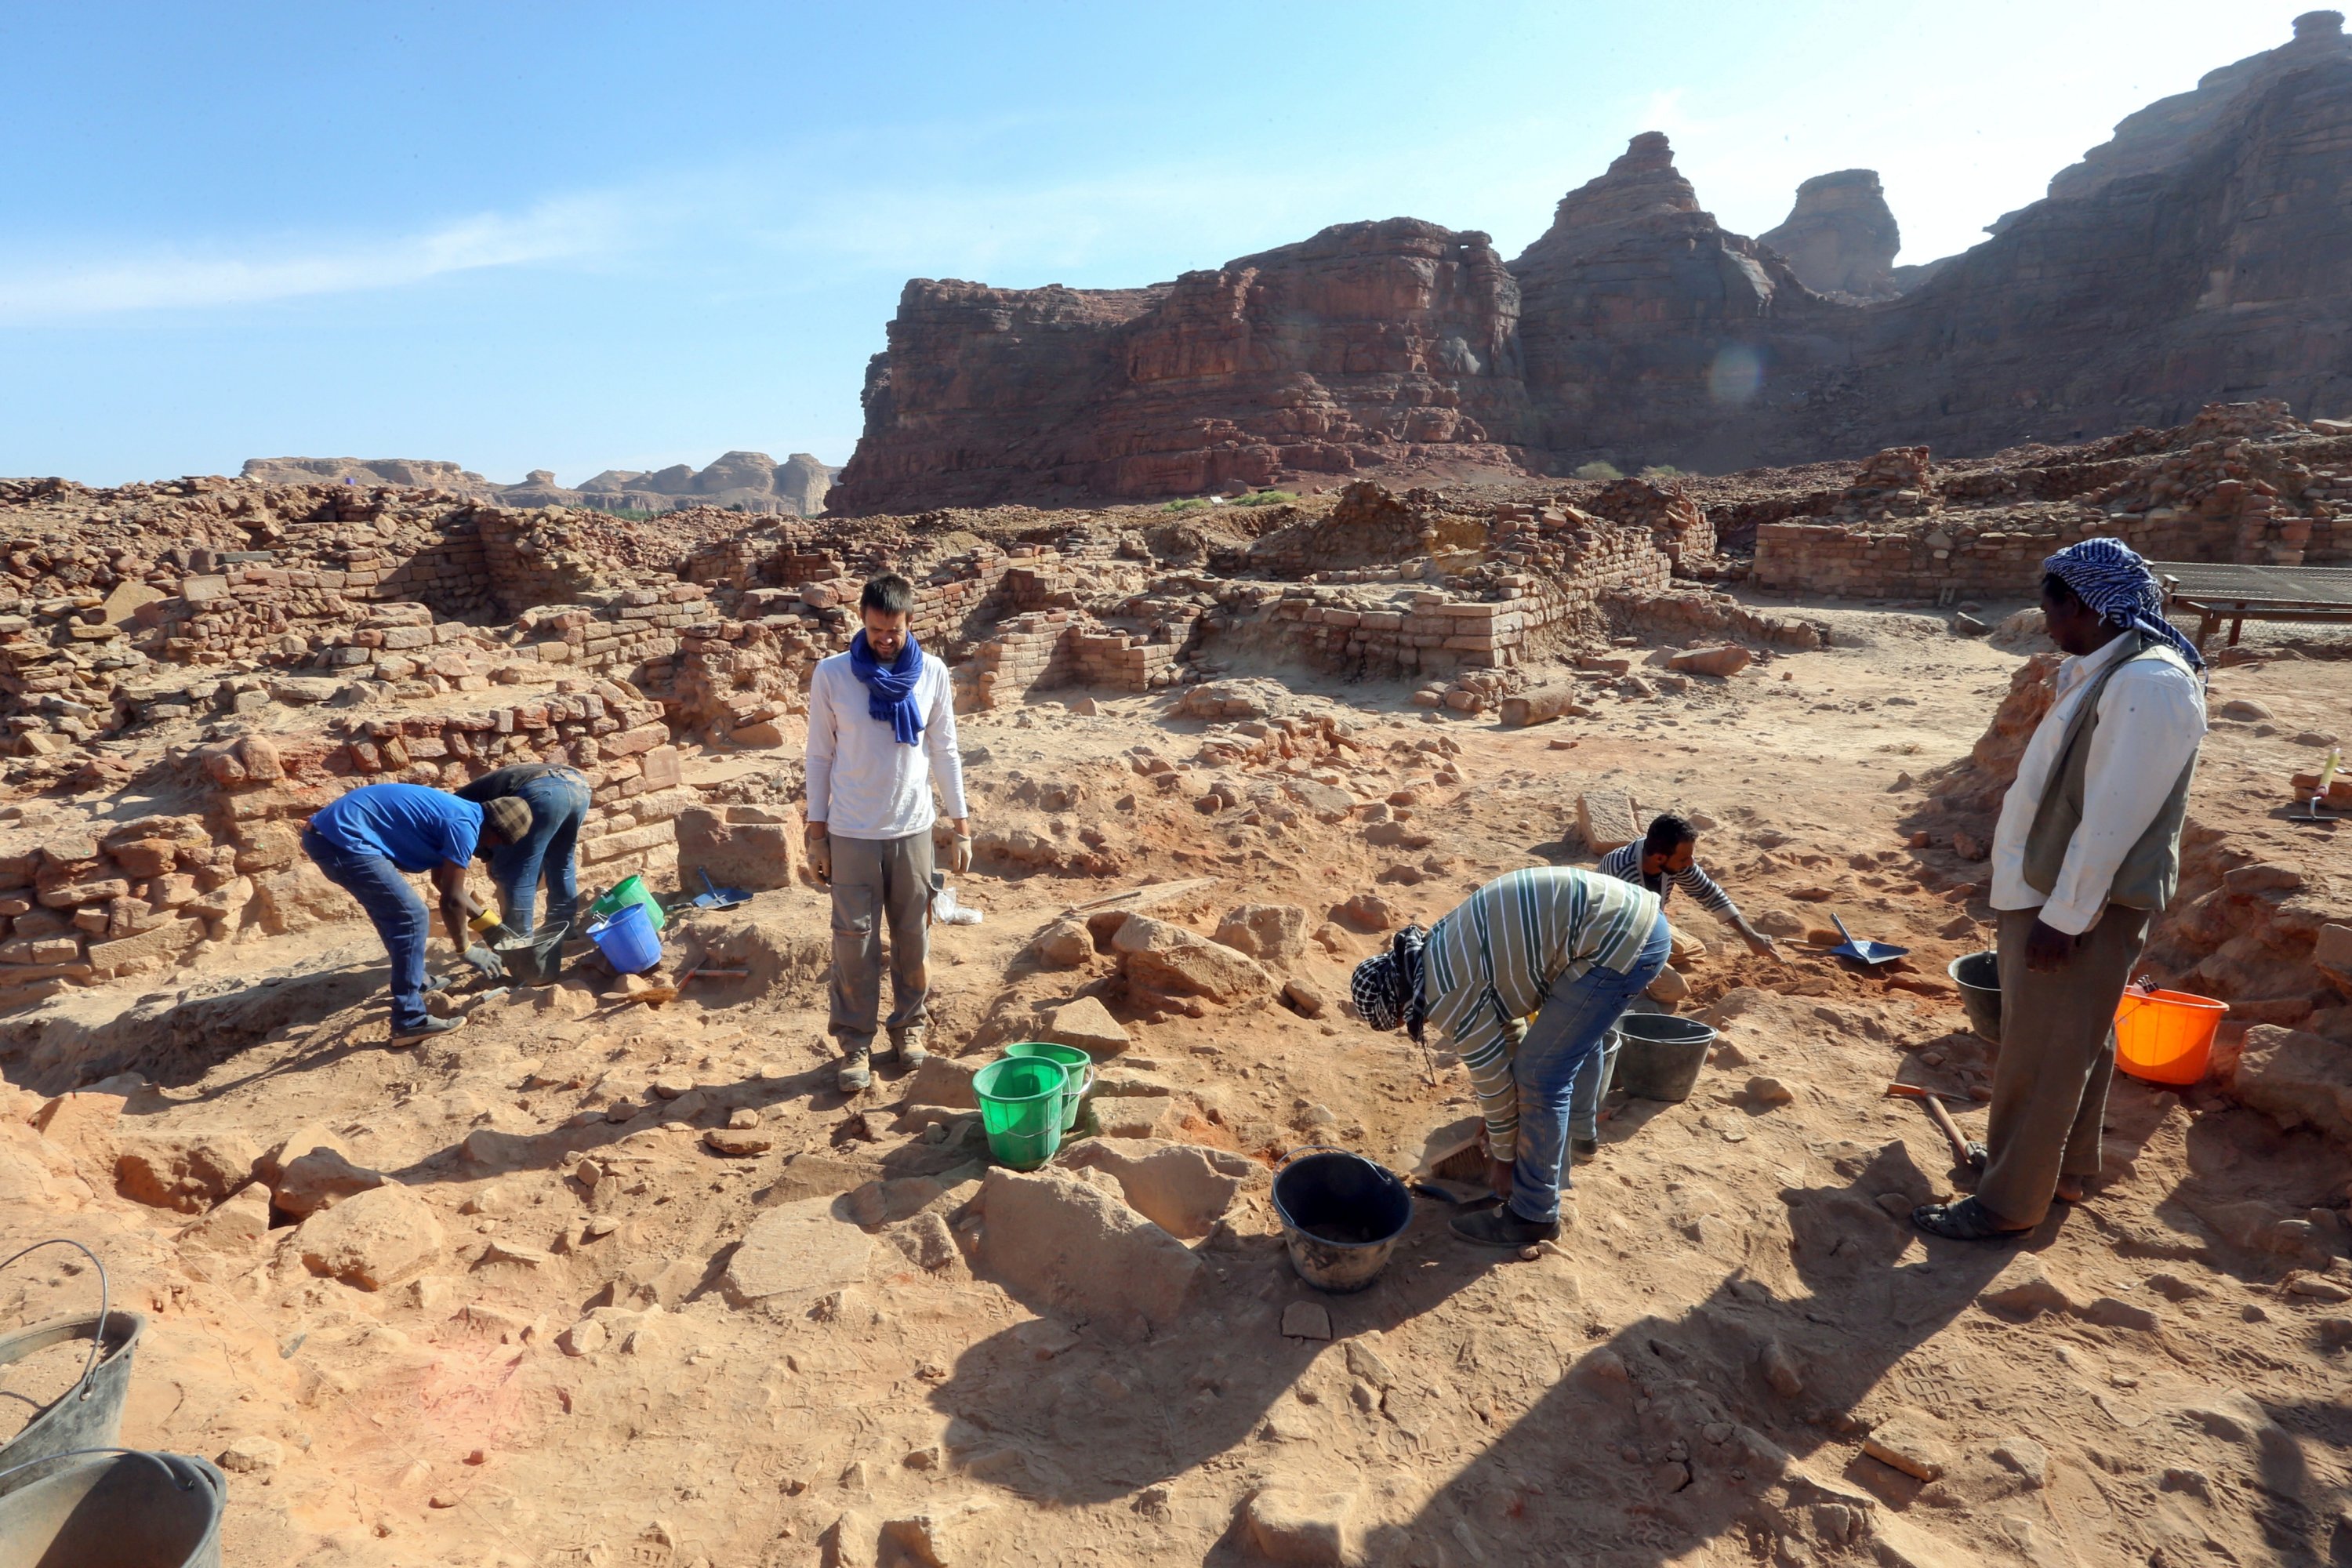 A French archaeologist and his co-workers carefully clean the pottery to examine the findings known to be from the Dadan and Lihyan civilization dated 1,000 B.C., Al-Ula, Saudi Arabia, Oct. 30, 2021. (Reuters Photo)